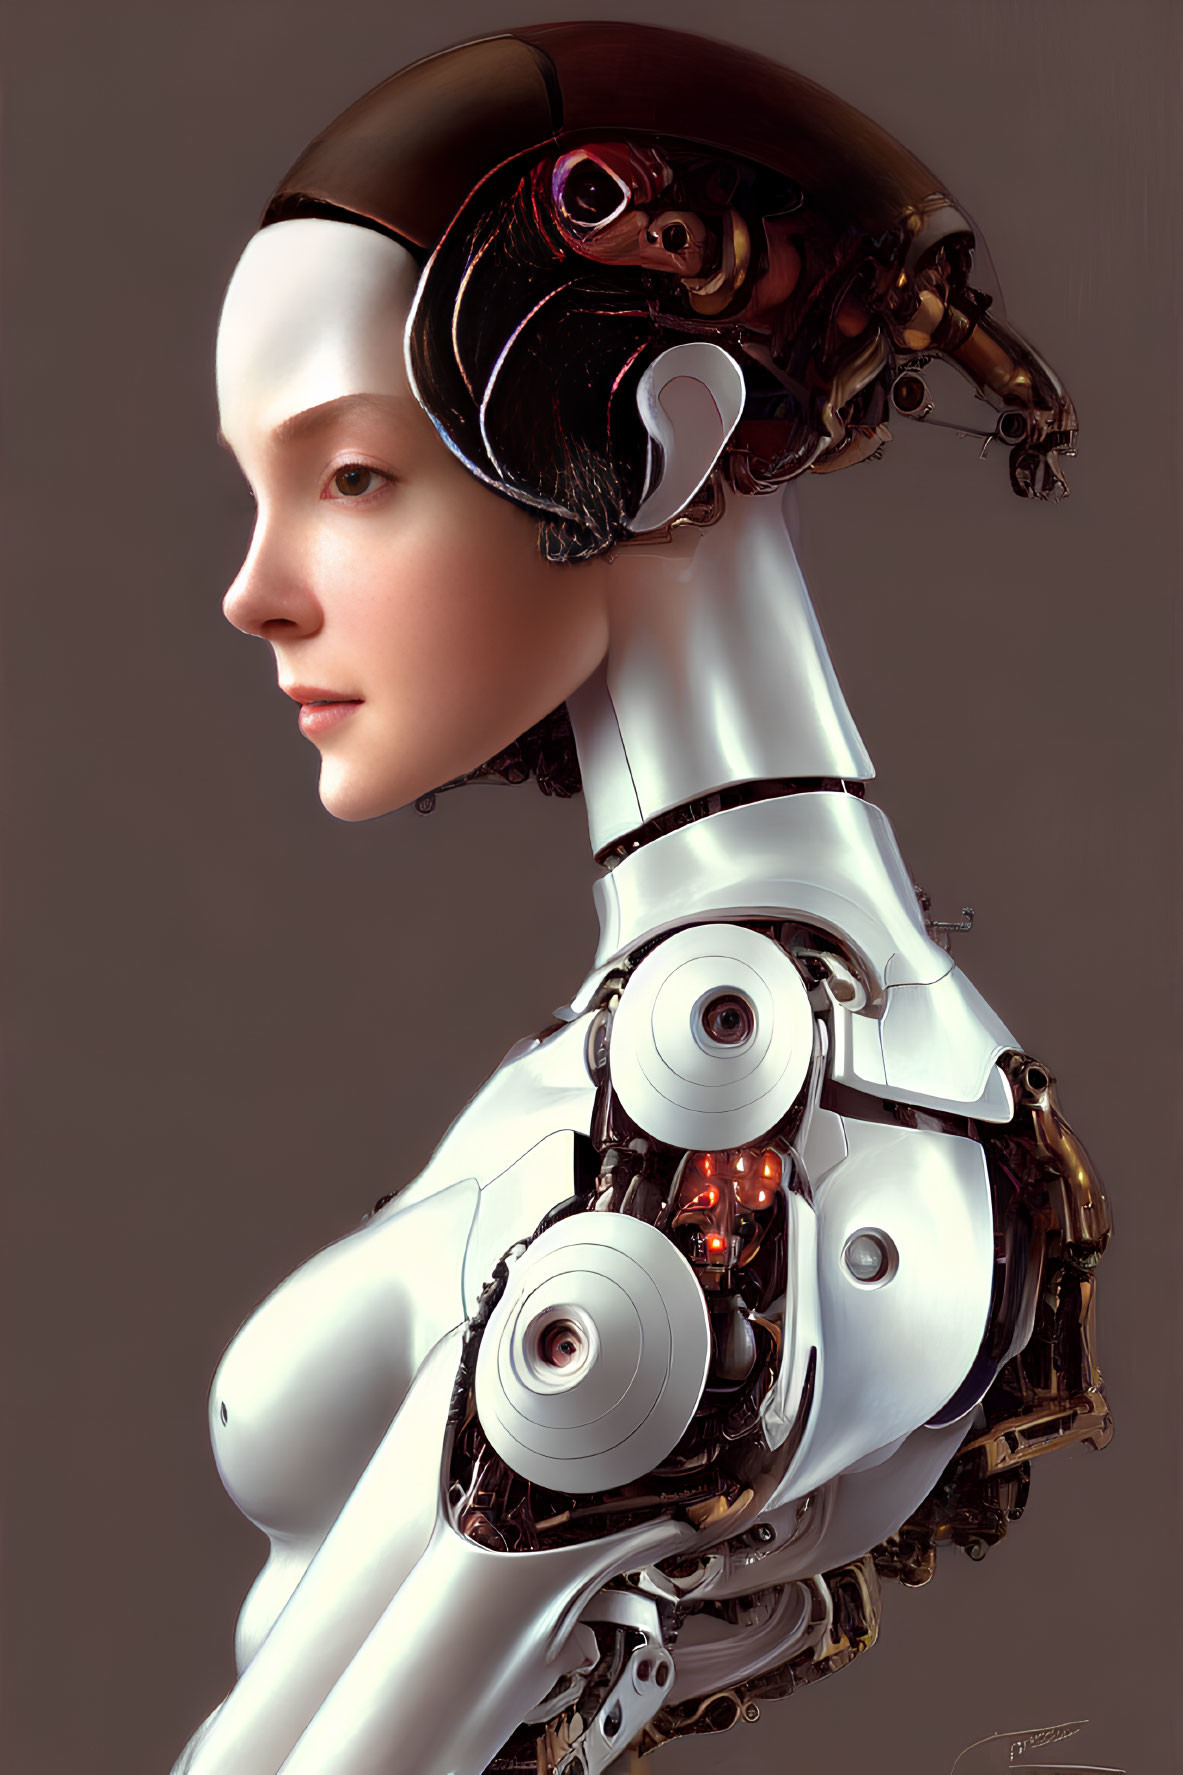 Female android with exposed mechanical parts on head and neck.